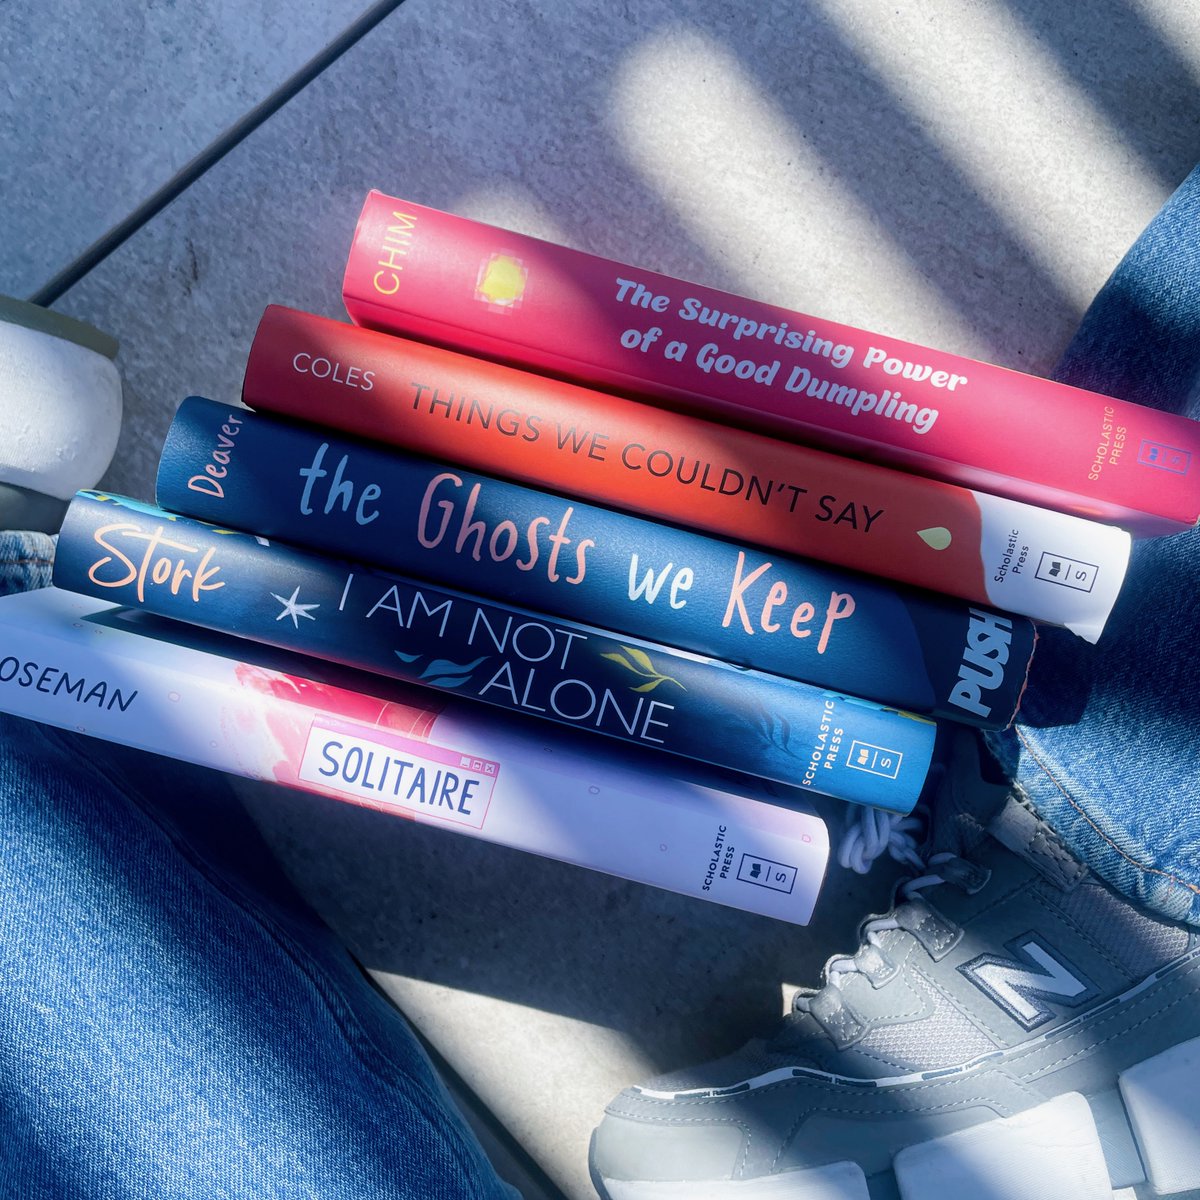 Today is #WorldMentalHealthDay ❤️ These honest, emotional, and powerful books will make you feel less alone, today and beyond: bit.ly/48KoDs7 @onewpc @mrjaycoles @StorkFrancisco @AliceOseman